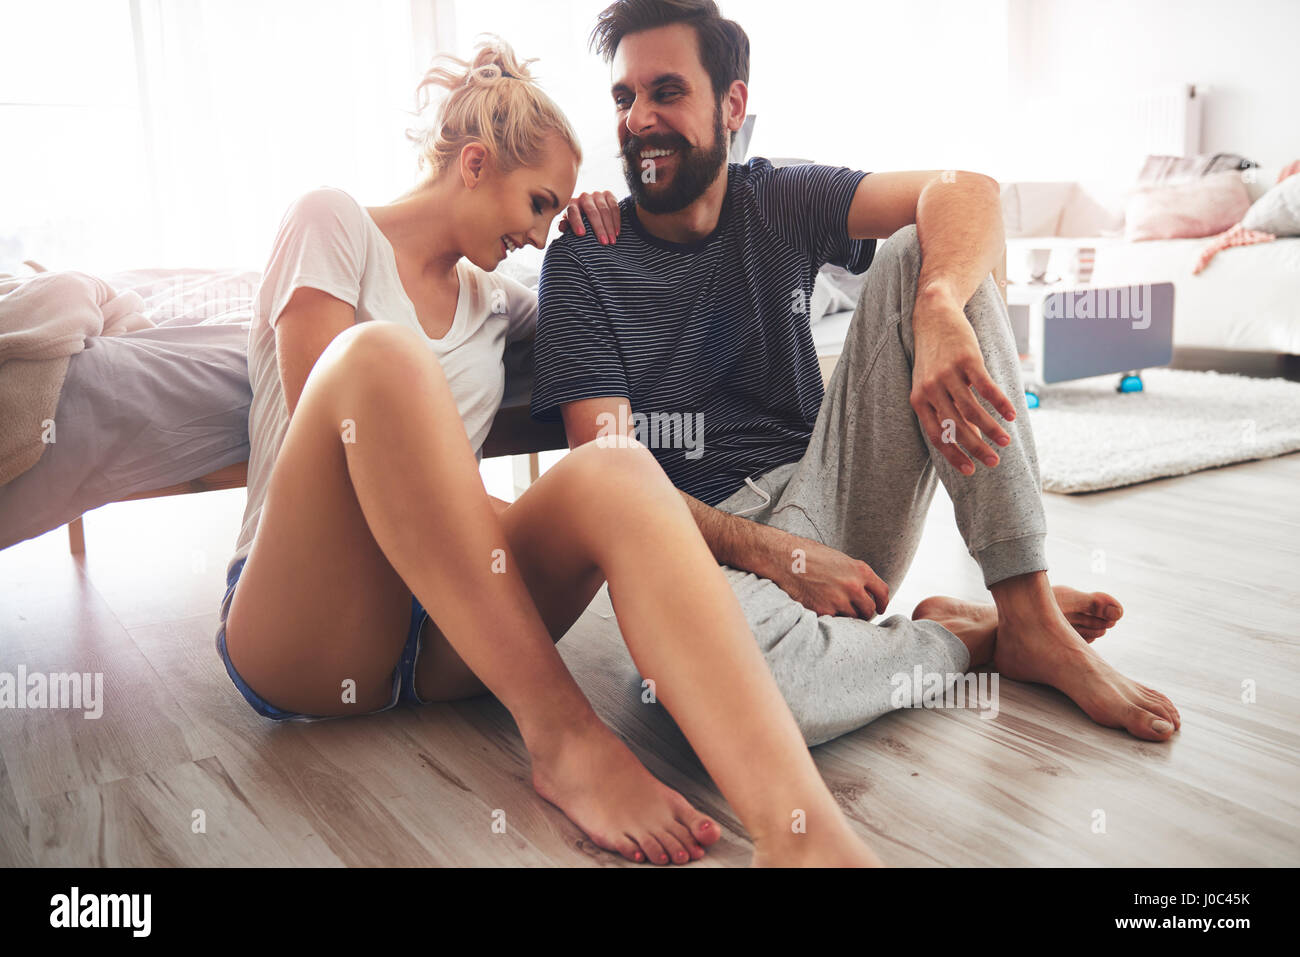 Couple sitting on floor beside bed, laughing Stock Photo